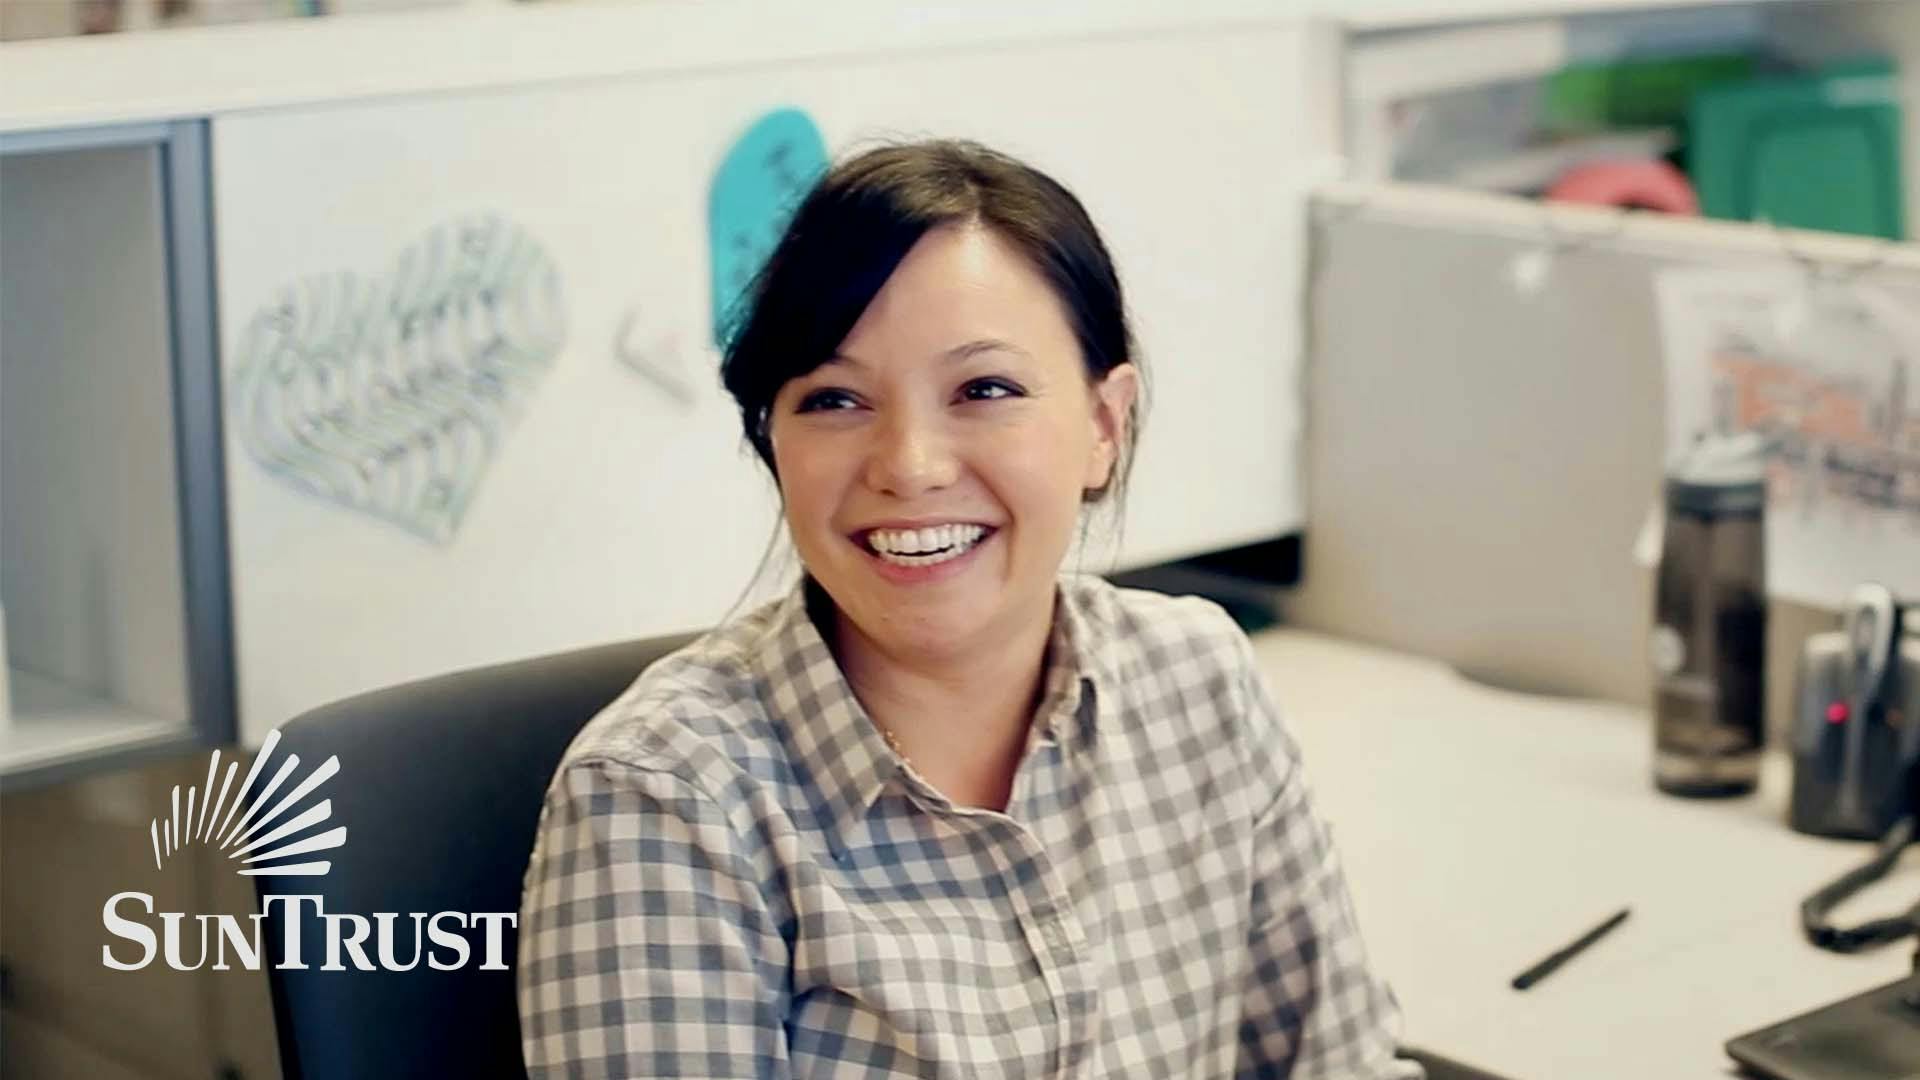 Woman wearing plaid with hair pulled back smiling with her mouth open at her work cubicle. Still from the “SunTrust Momentum OnUp” campaign.